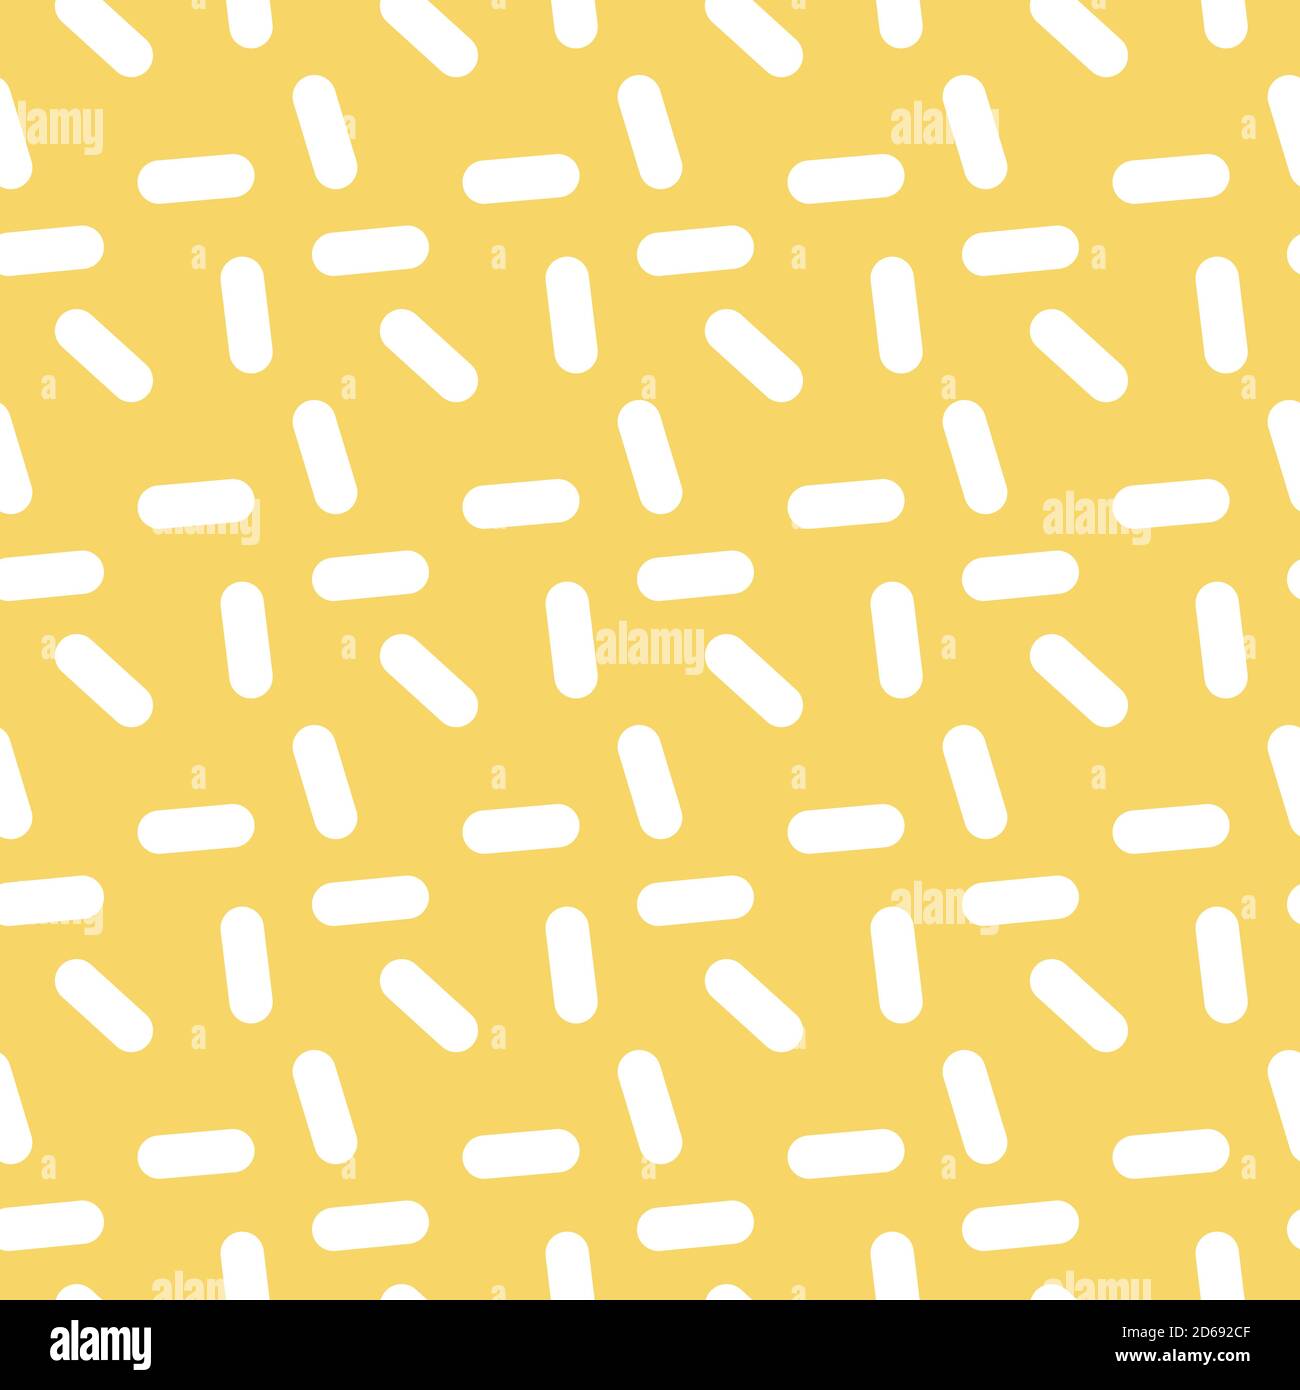 Geometric shape seamless pattern for bed cover,textile,cushion cover,phone case, home decor,fabric,home furnishings, wallpaper,curtain,tiles,etc. Stock Vector